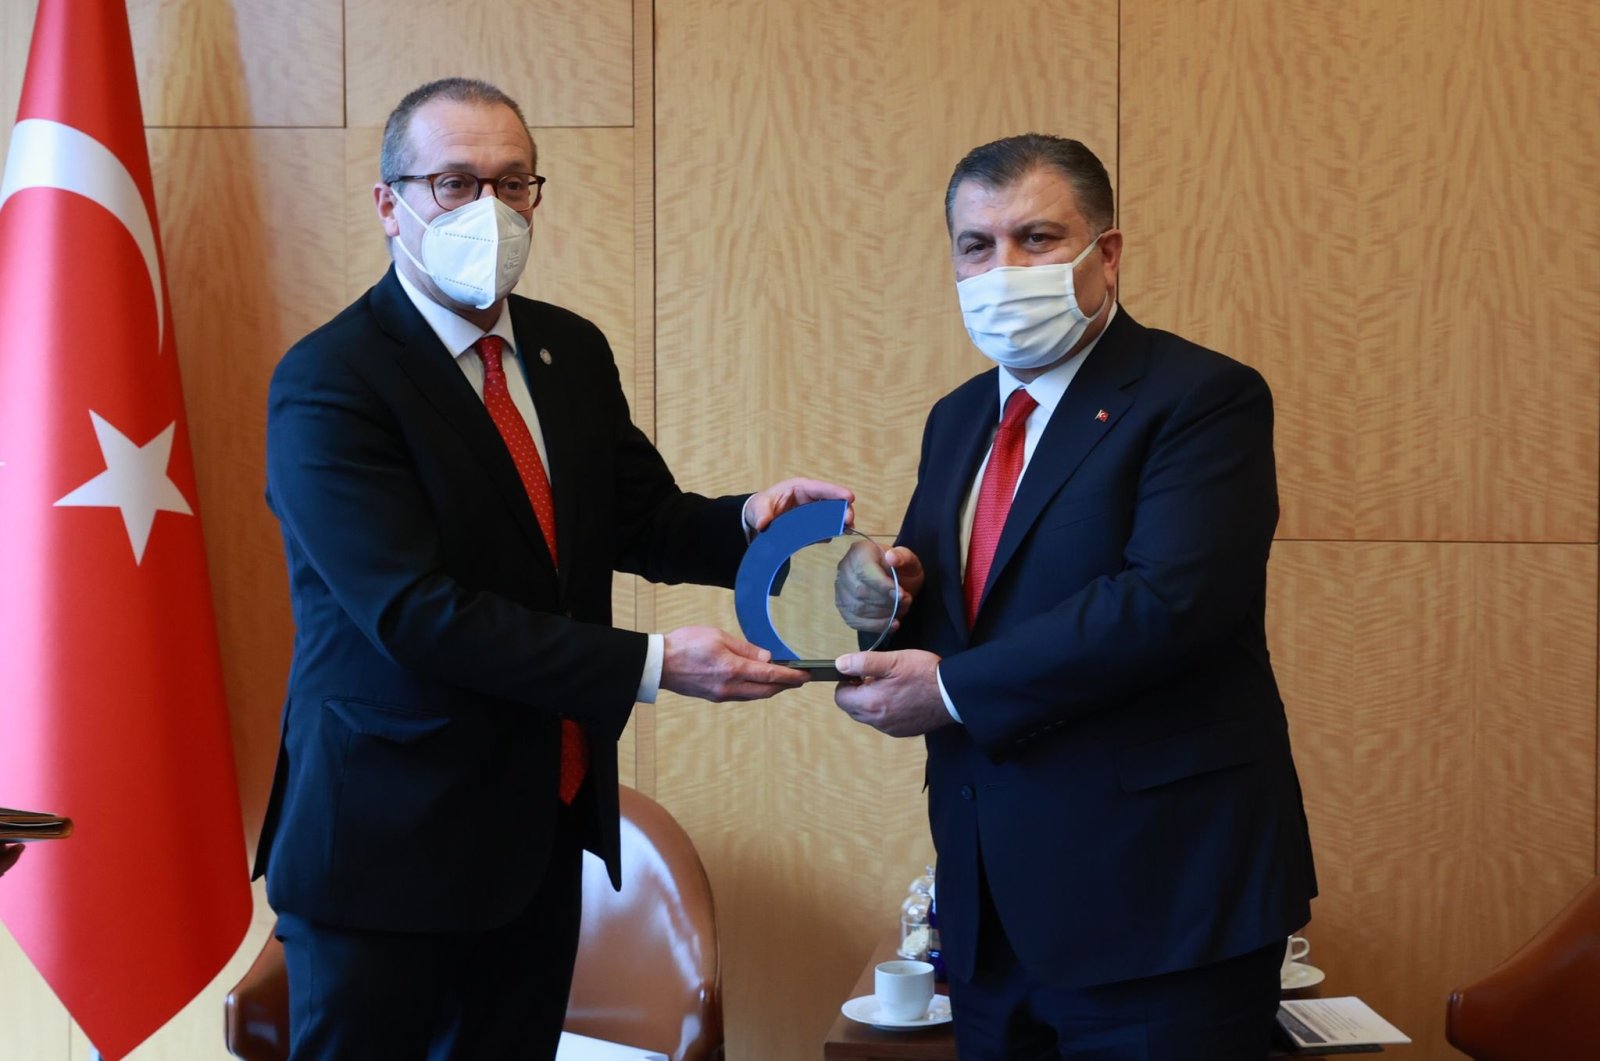 WHO Regional Director for Europe Hans Kluge (L) presents an award to Health Minister Fahrettin Koca, in Istanbul, Turkey, March 17, 2022. (AA Photo)